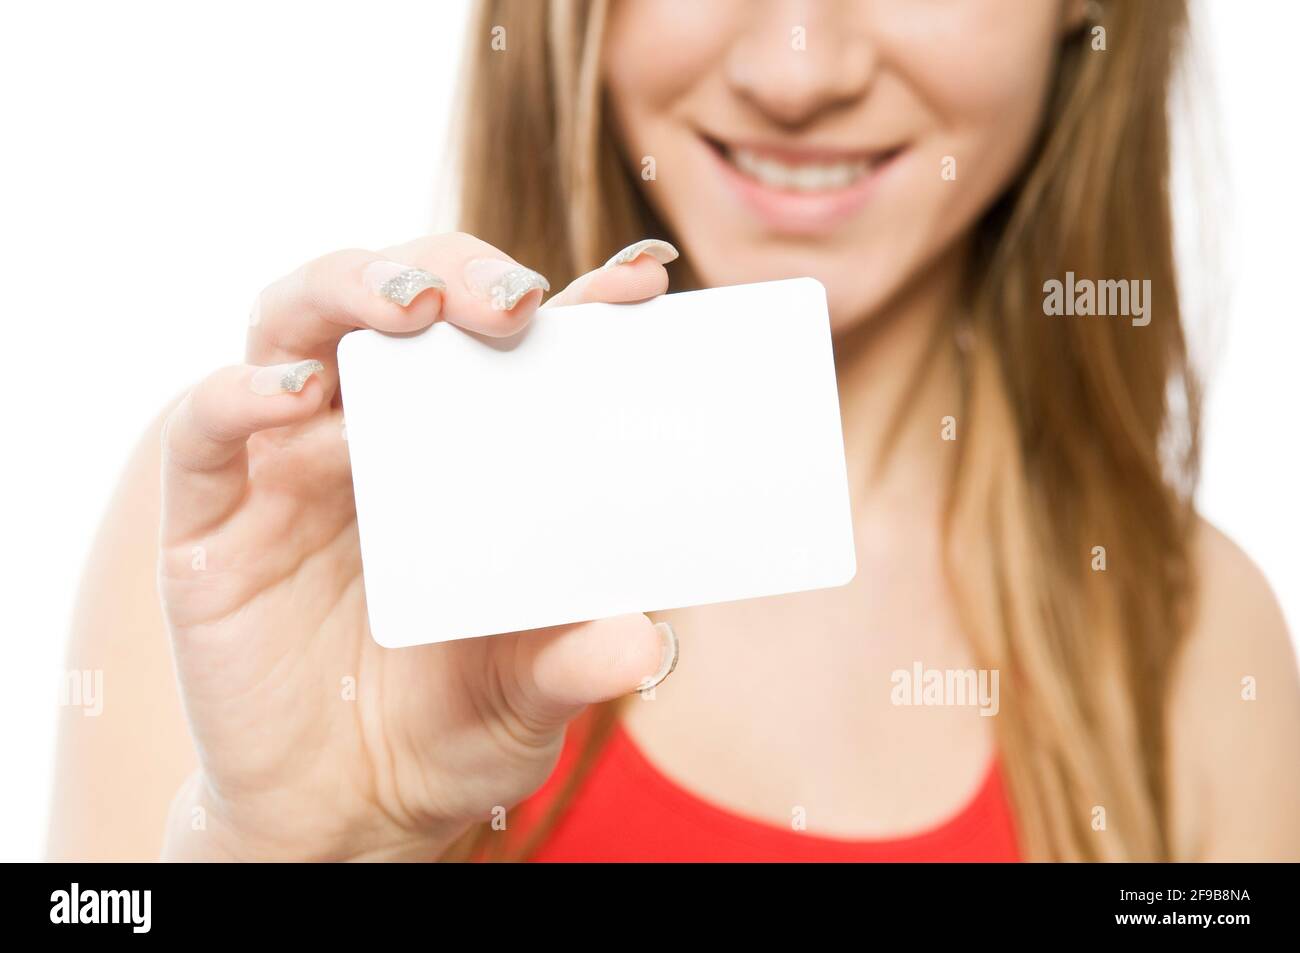 Young happy woman with long brown hair in red shirt holding blank business or credit card with copy space for your advertising text message. Isolated Stock Photo